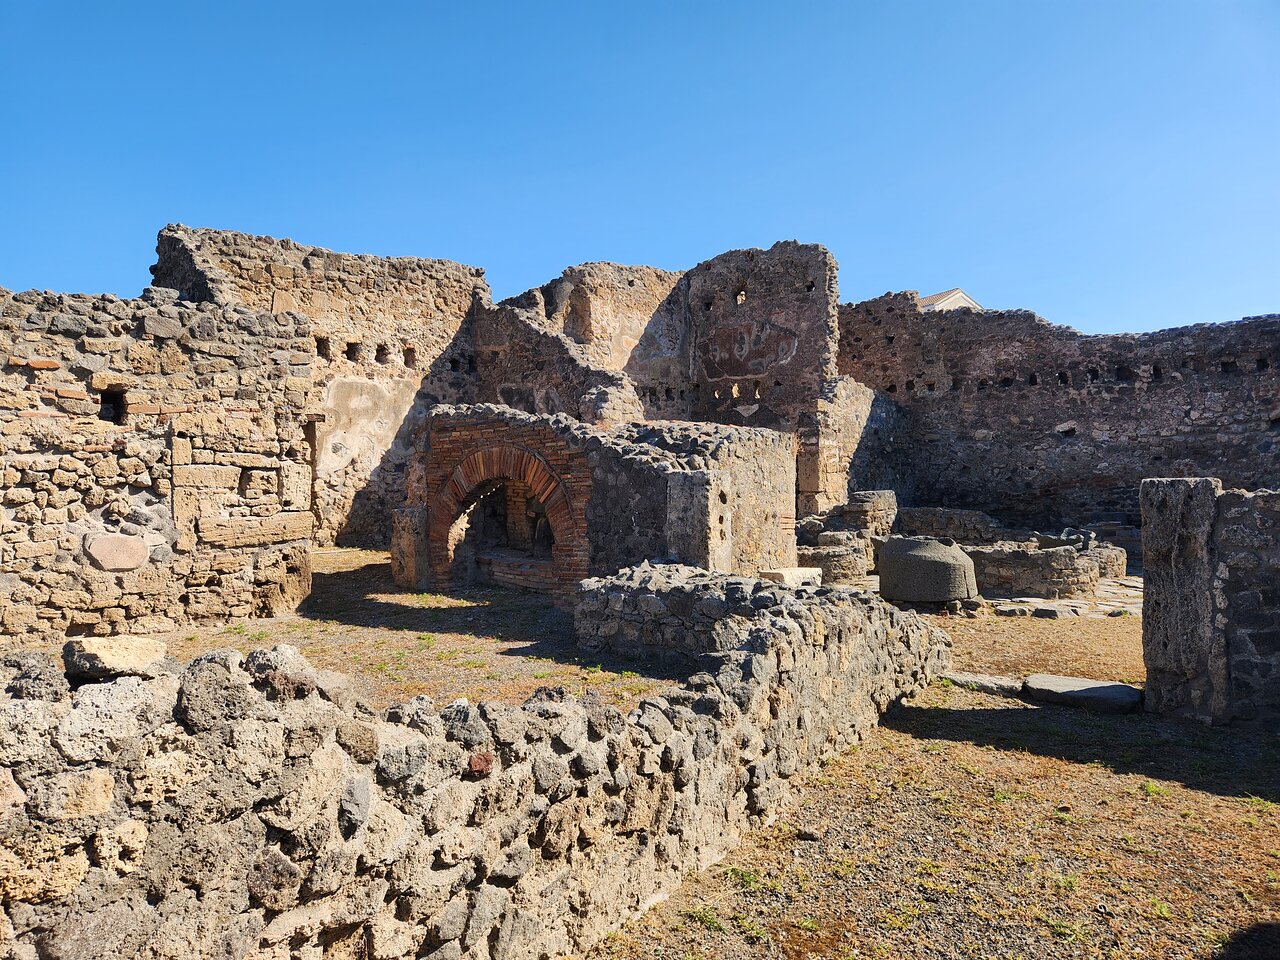 Visiting the Lost City of Pompeii from Naples cruise port by shore excursions, tours and ferry hydrofoil